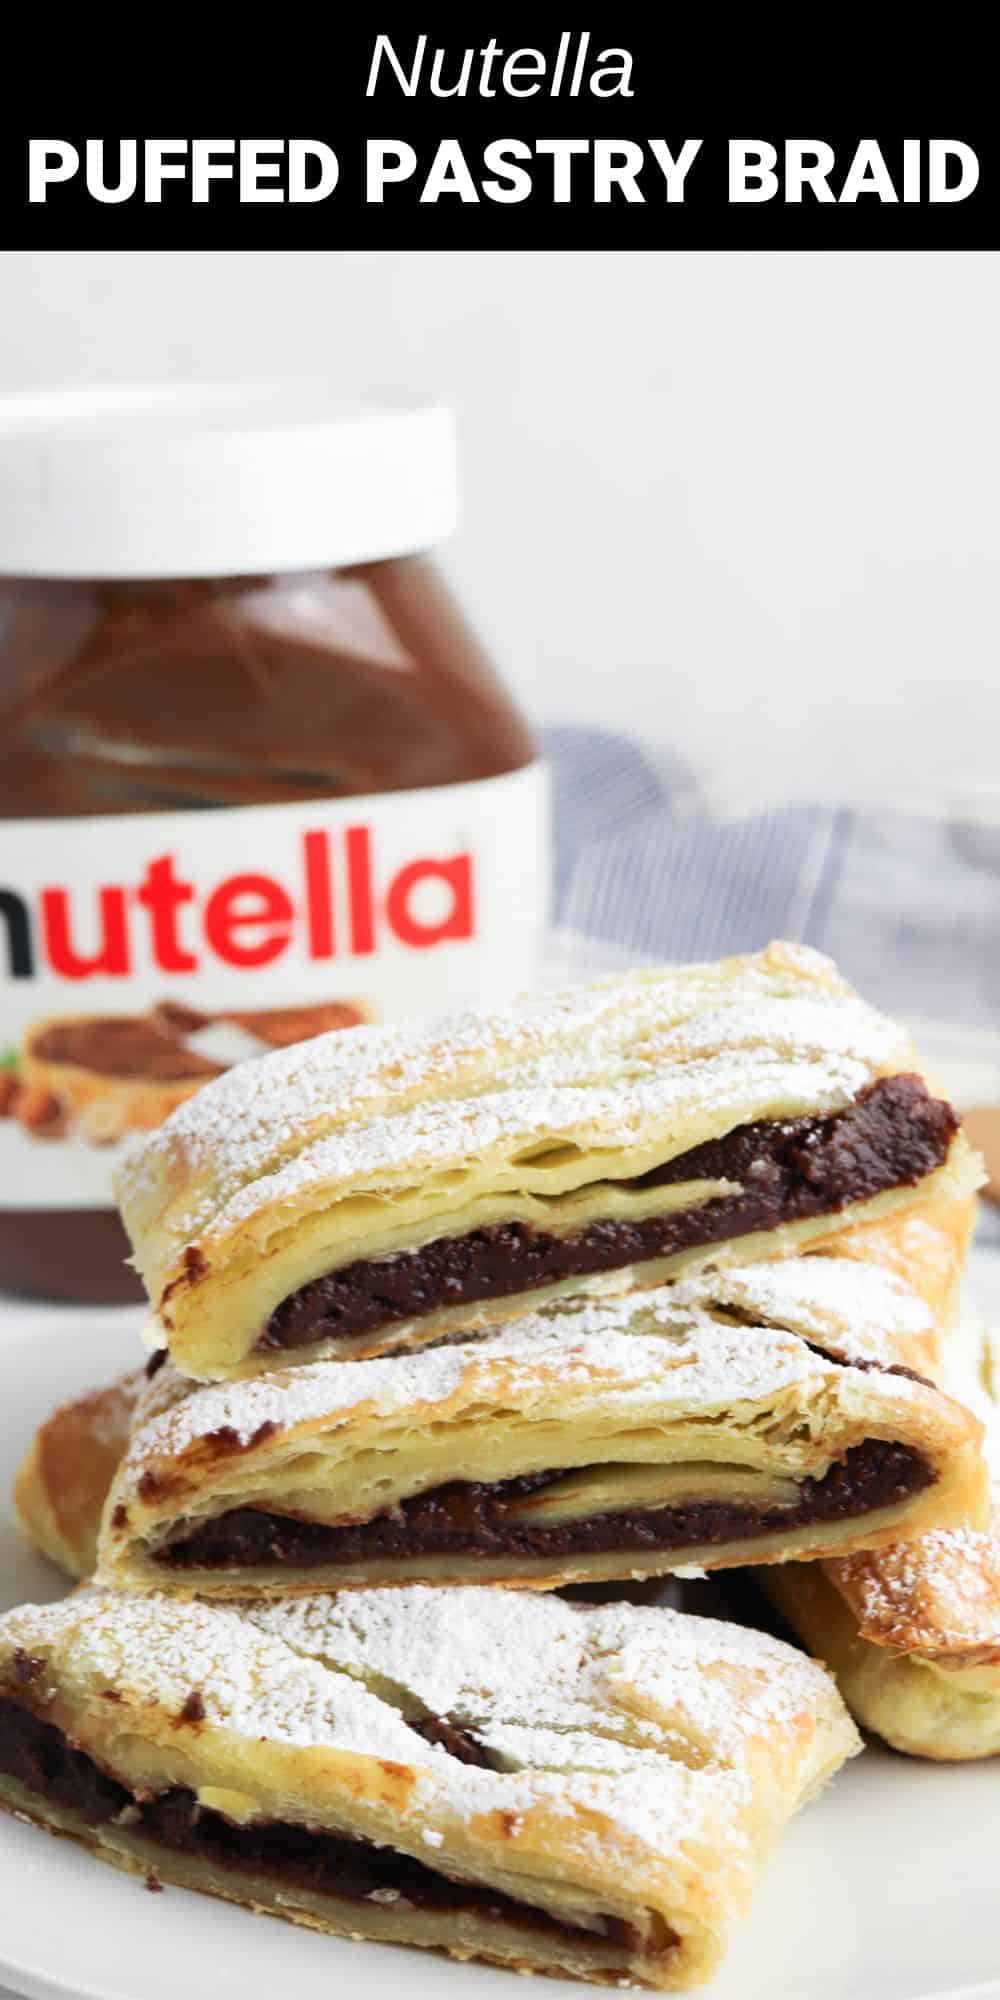 This Nutella puffed pastry braid is as pretty as it is delicious. Buttery and flaky pastry dough is braided around a rich and creamy Nutella filling for a beautiful sweet treat that’s a surprisingly easy dessert to make.